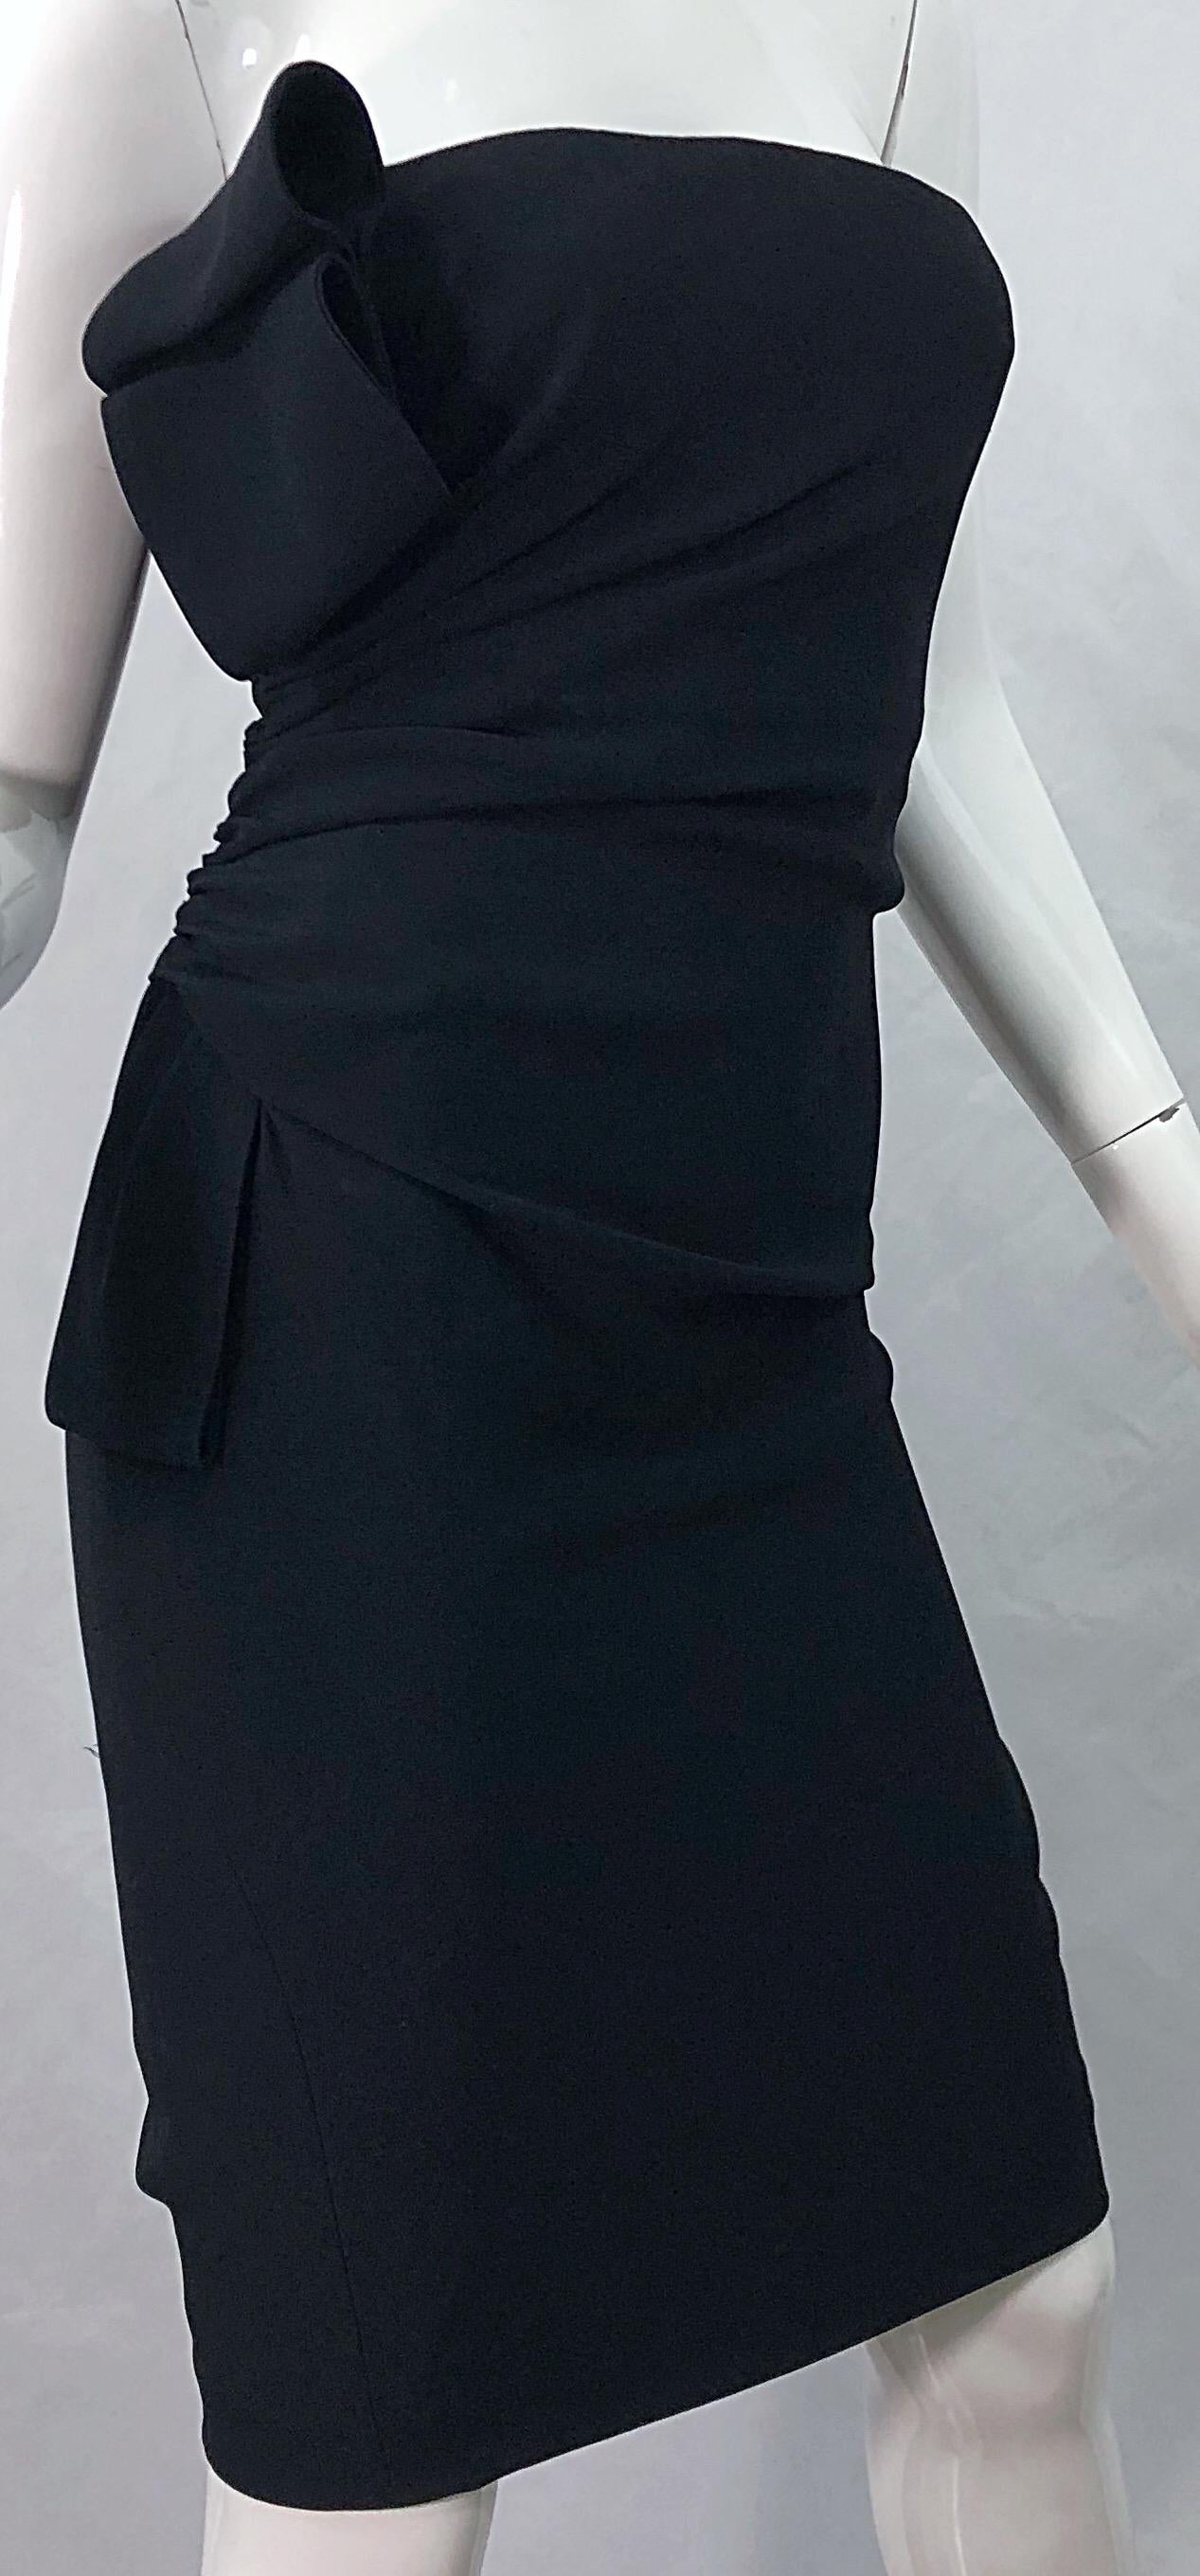 Valentino Early 2000s Size 8 Black Strapless Avant Garde Strapless Dress For Sale 4